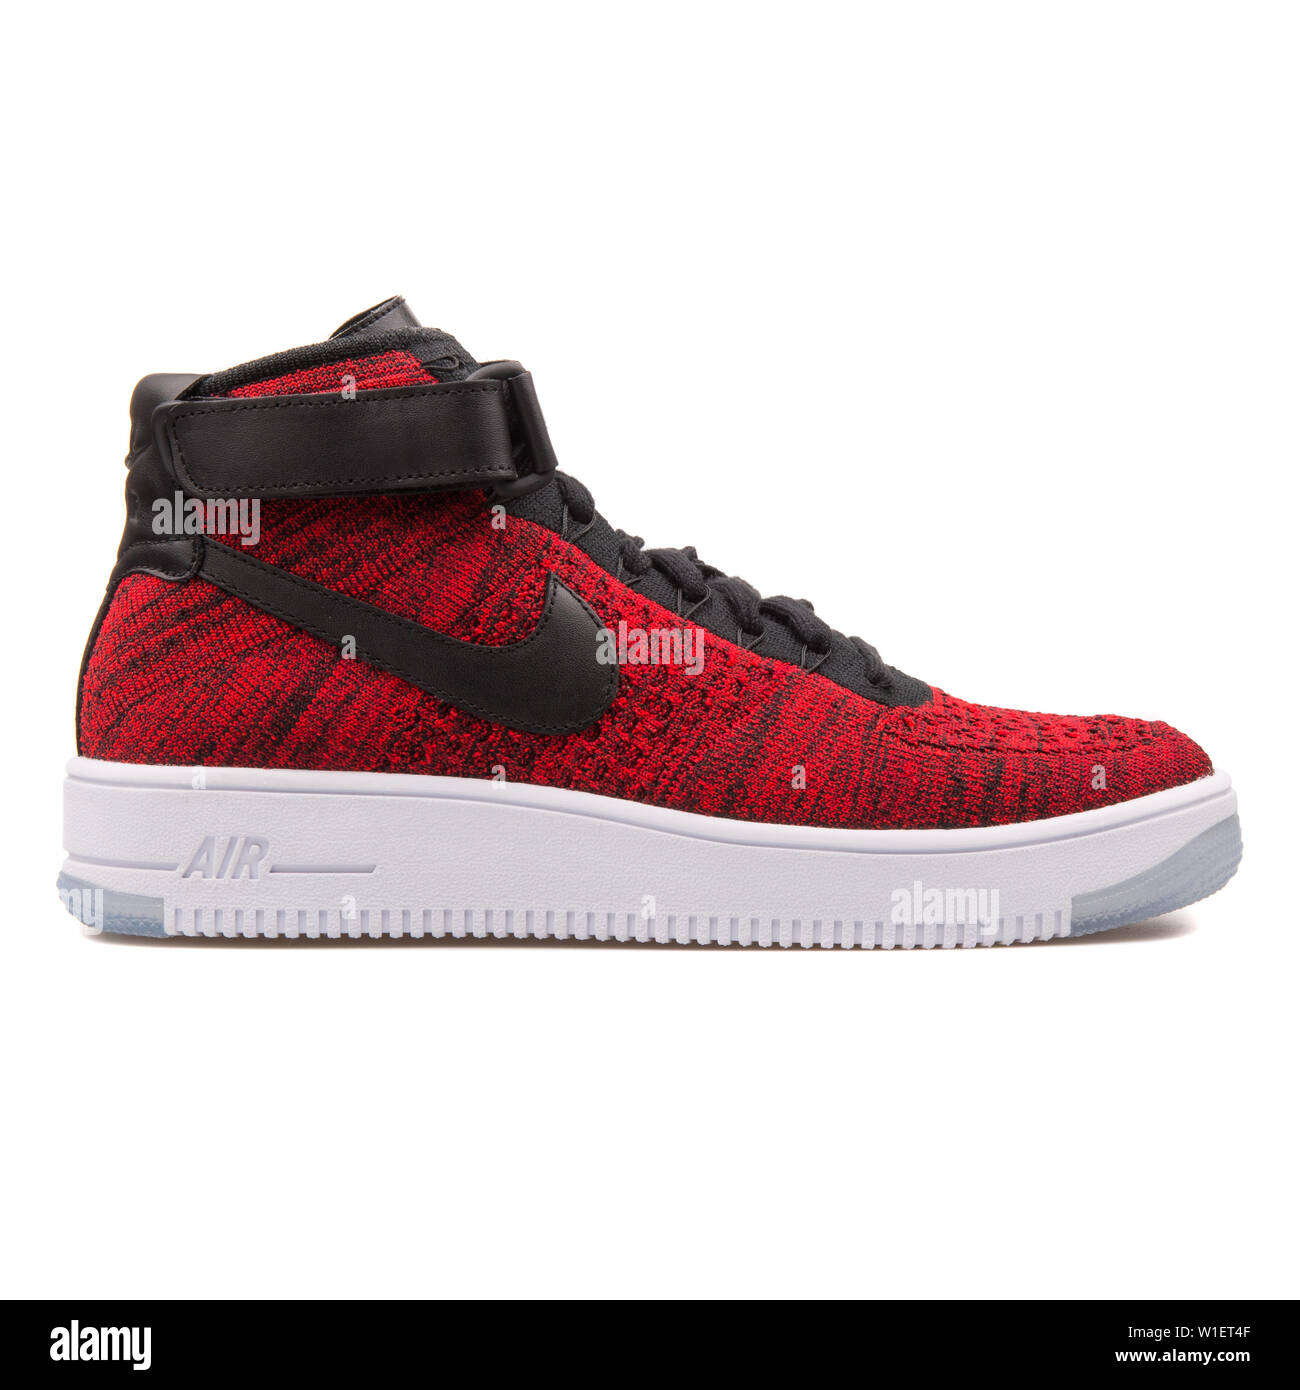 VIENNA, AUSTRIA - AUGUST 10, 2017: Nike Air Force 1 Ultra Flyknit Mid red  and black sneaker on white background Stock Photo - Alamy